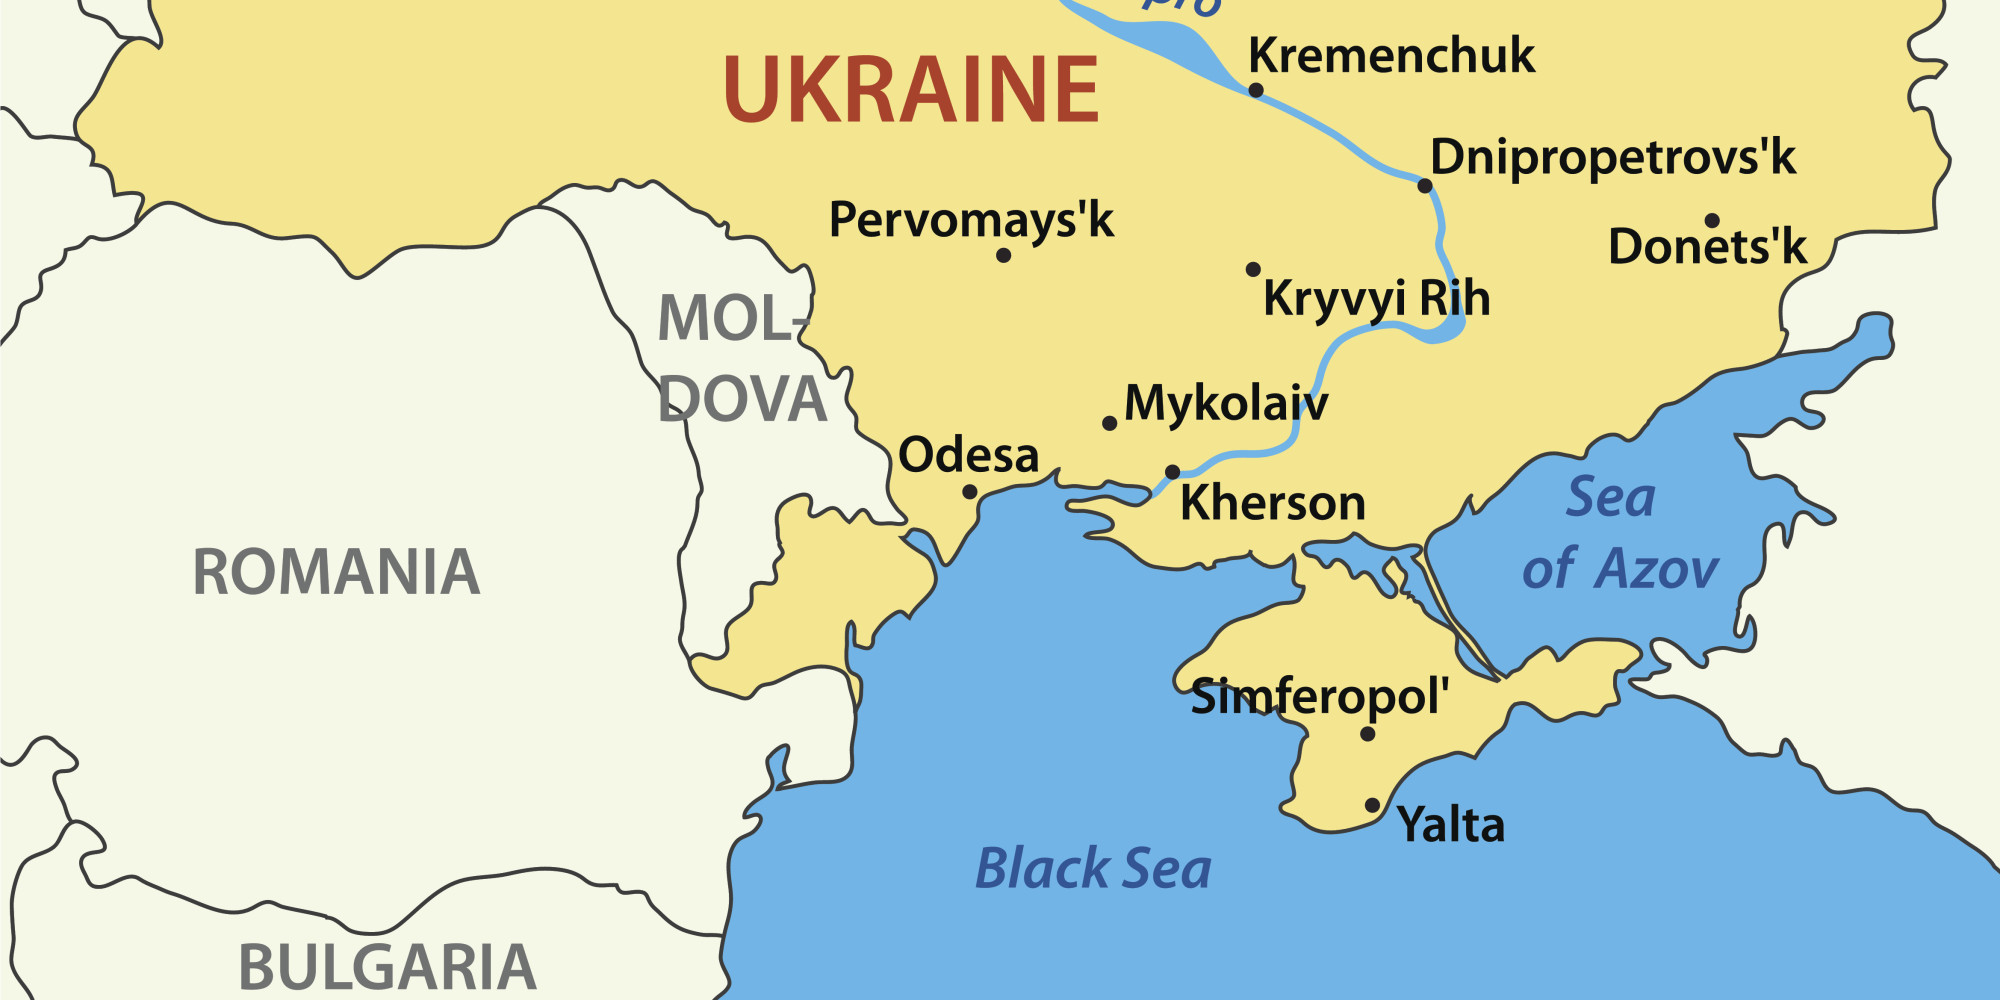 after-russia-s-annexation-of-crimea-a-nation-under-siege-huffpost-uk